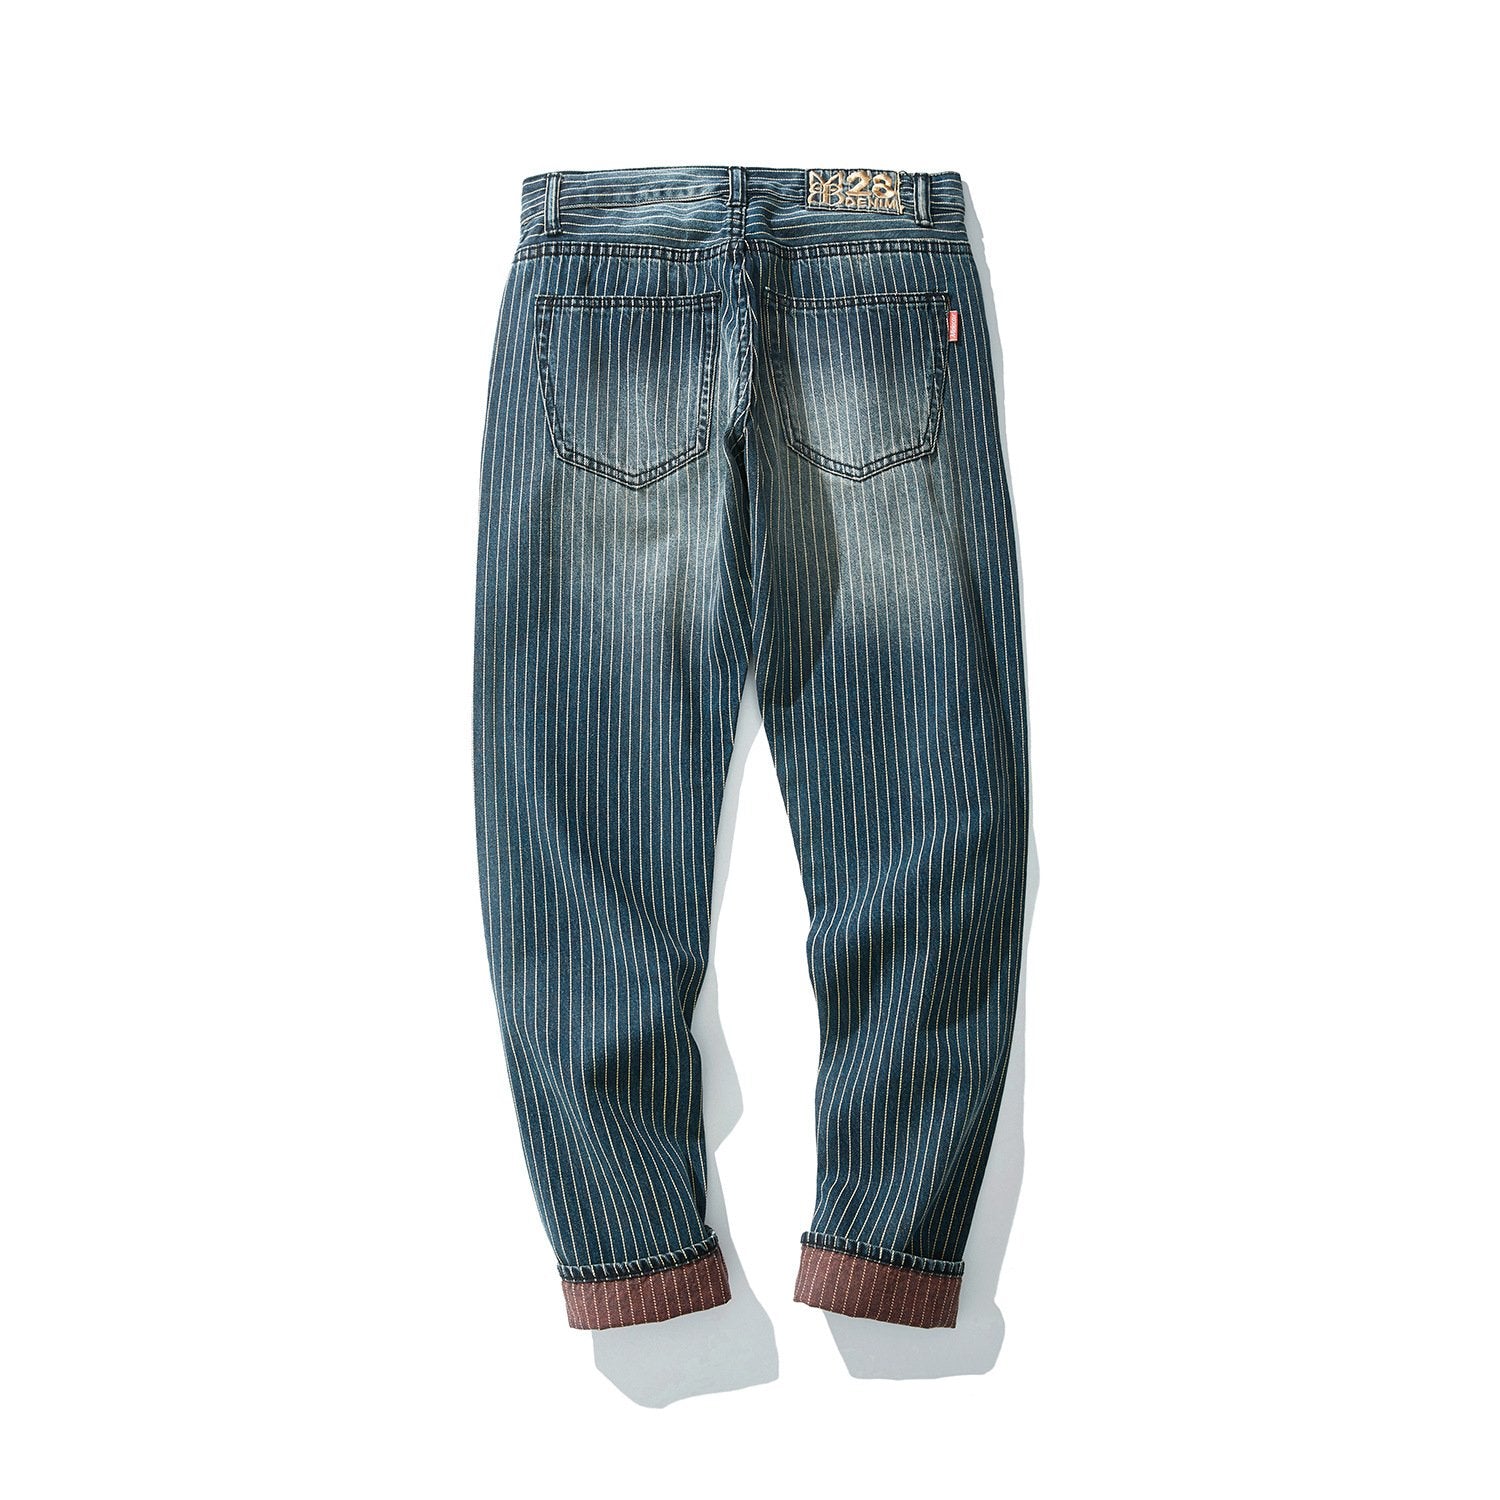 Men's 90s Jeans Striped Retro Washed Casual  Denim Pants